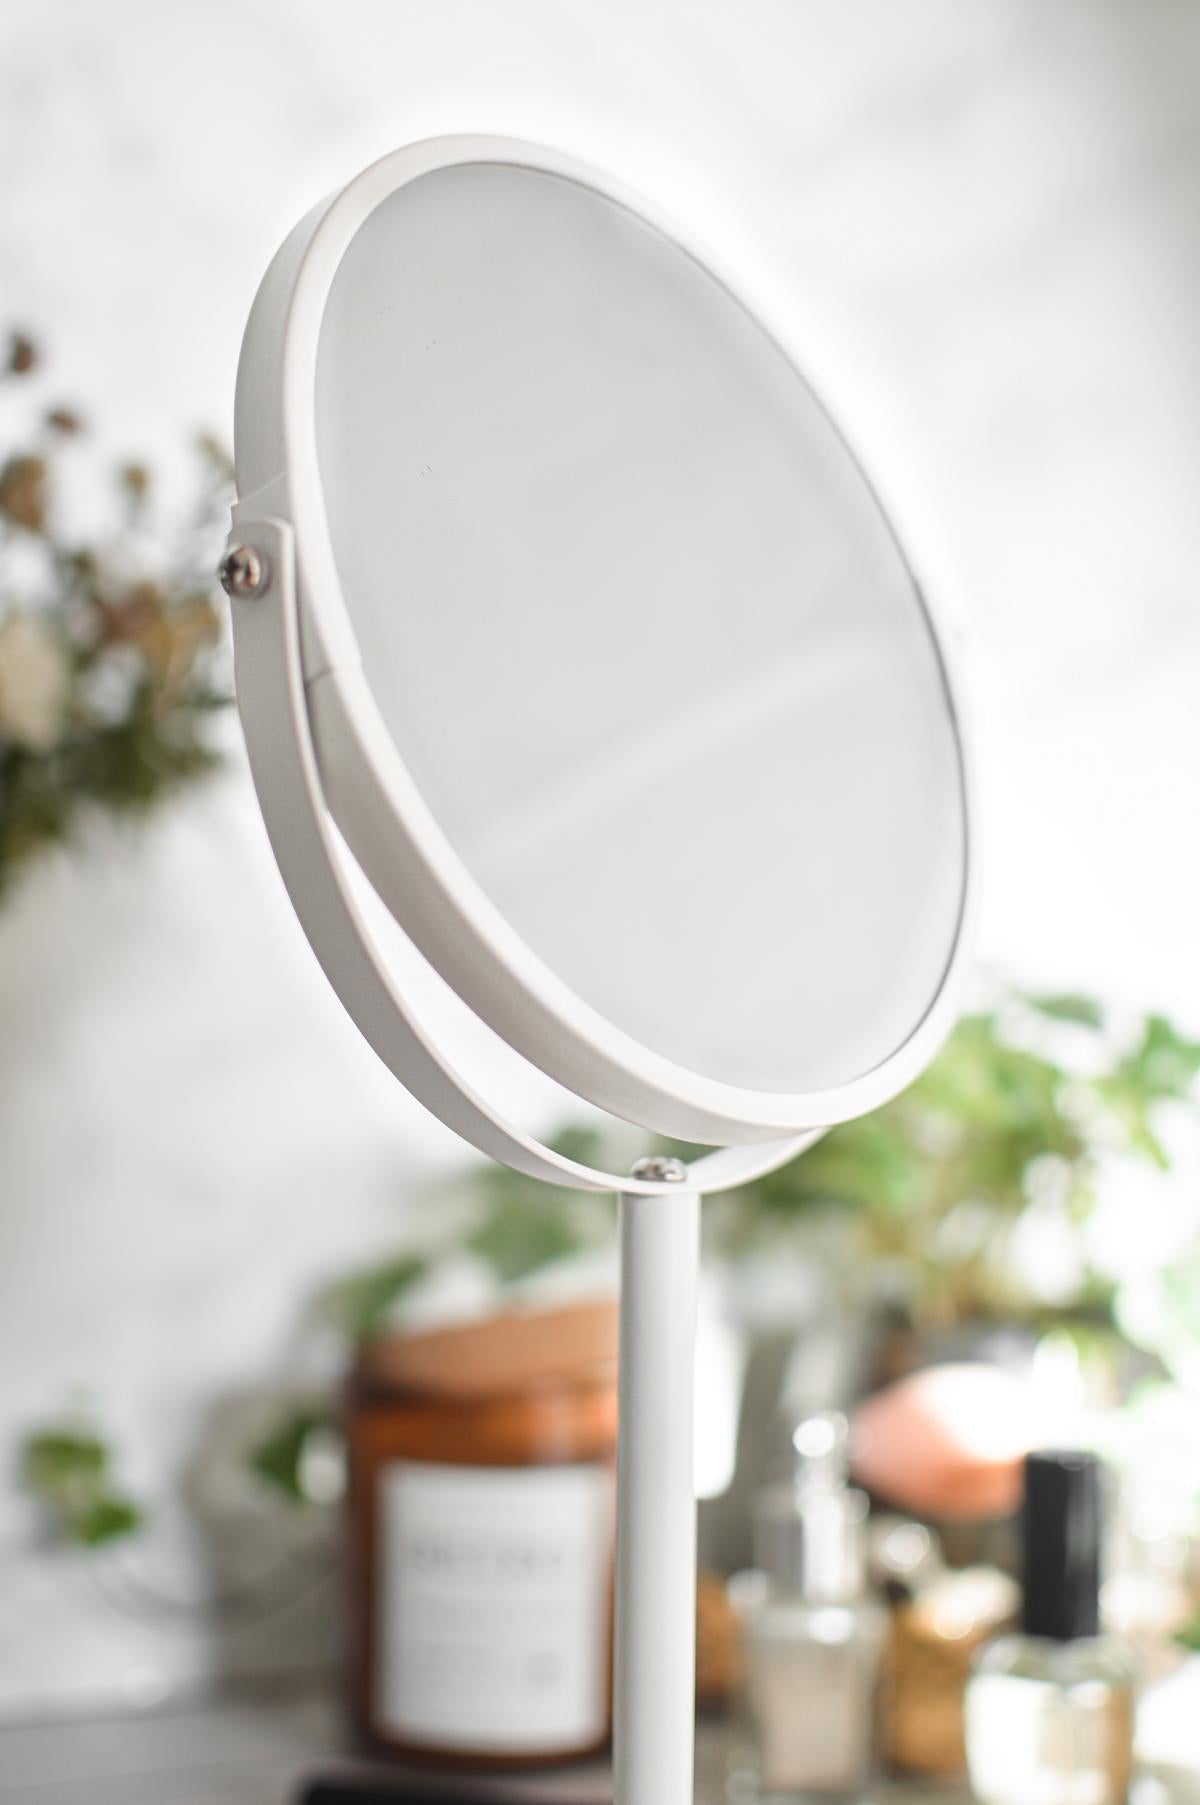 Make-up mirror, cosmetic mirror, shaving mirror, standing mirror, magnification white